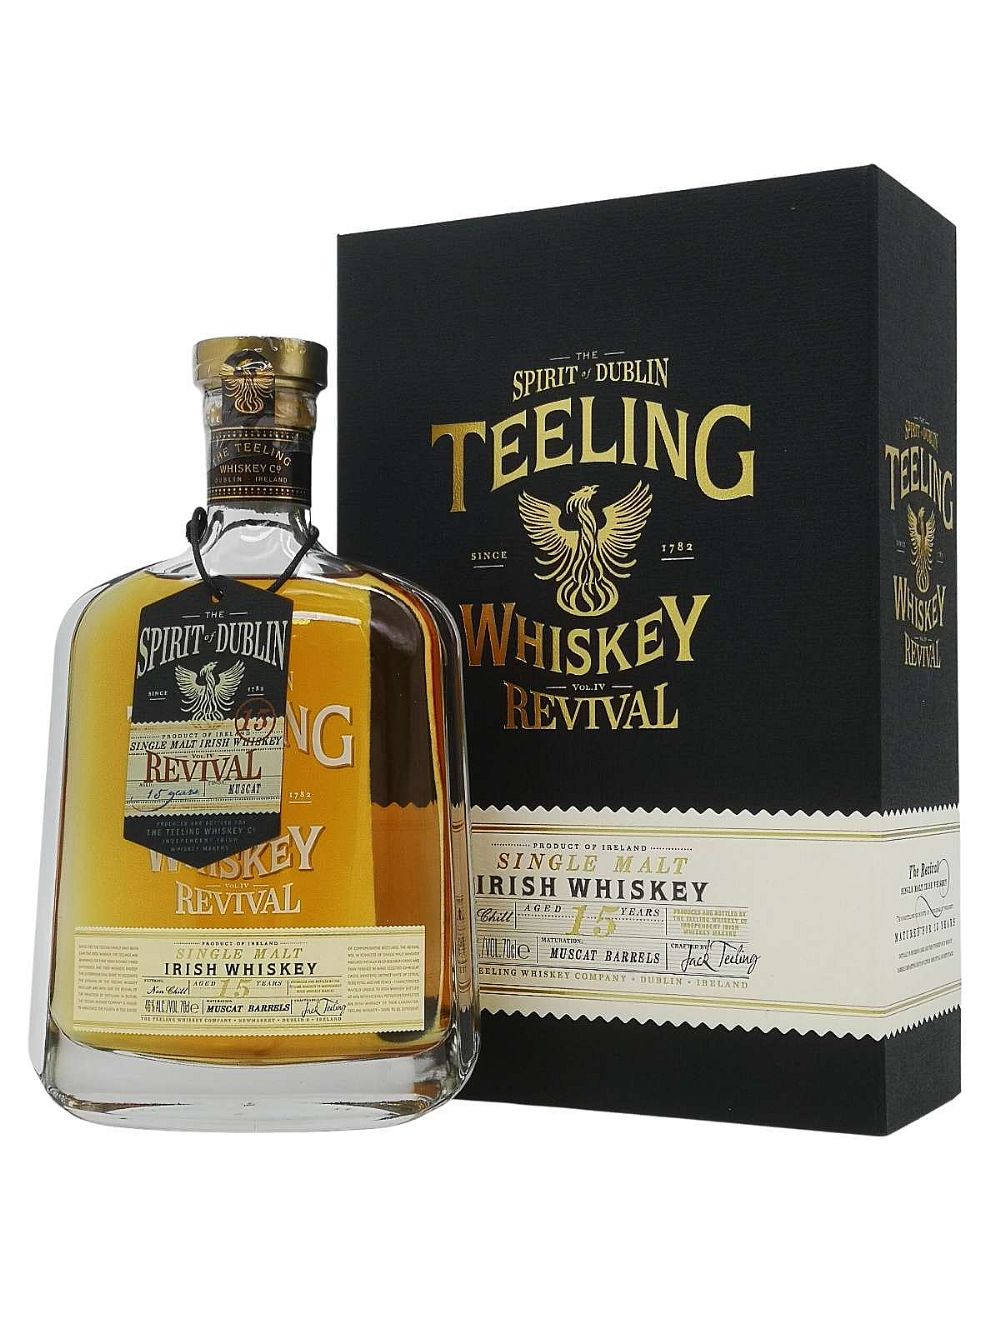 Teeling Revival Volume IV, 15 year old, Muscat Cask Finish